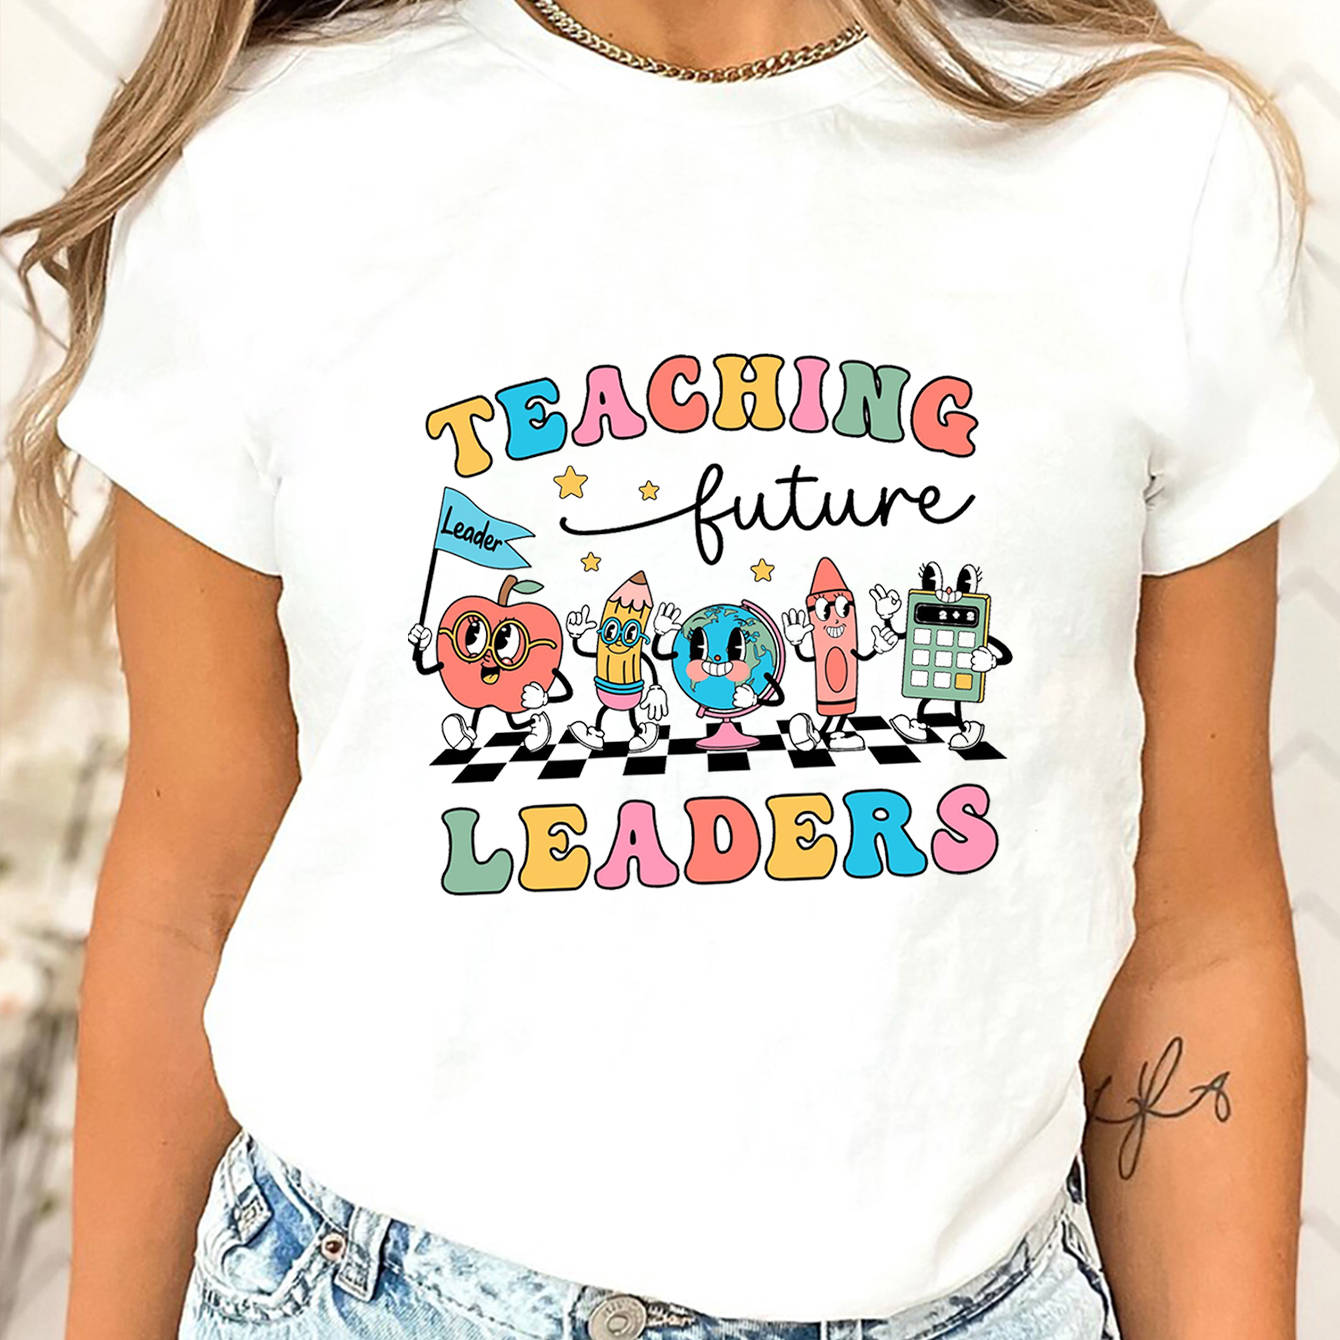 

Teaching Future Leaders Print T-shirt, Short Sleeve Crew Neck Casual Top For Summer & Spring, Women's Clothing